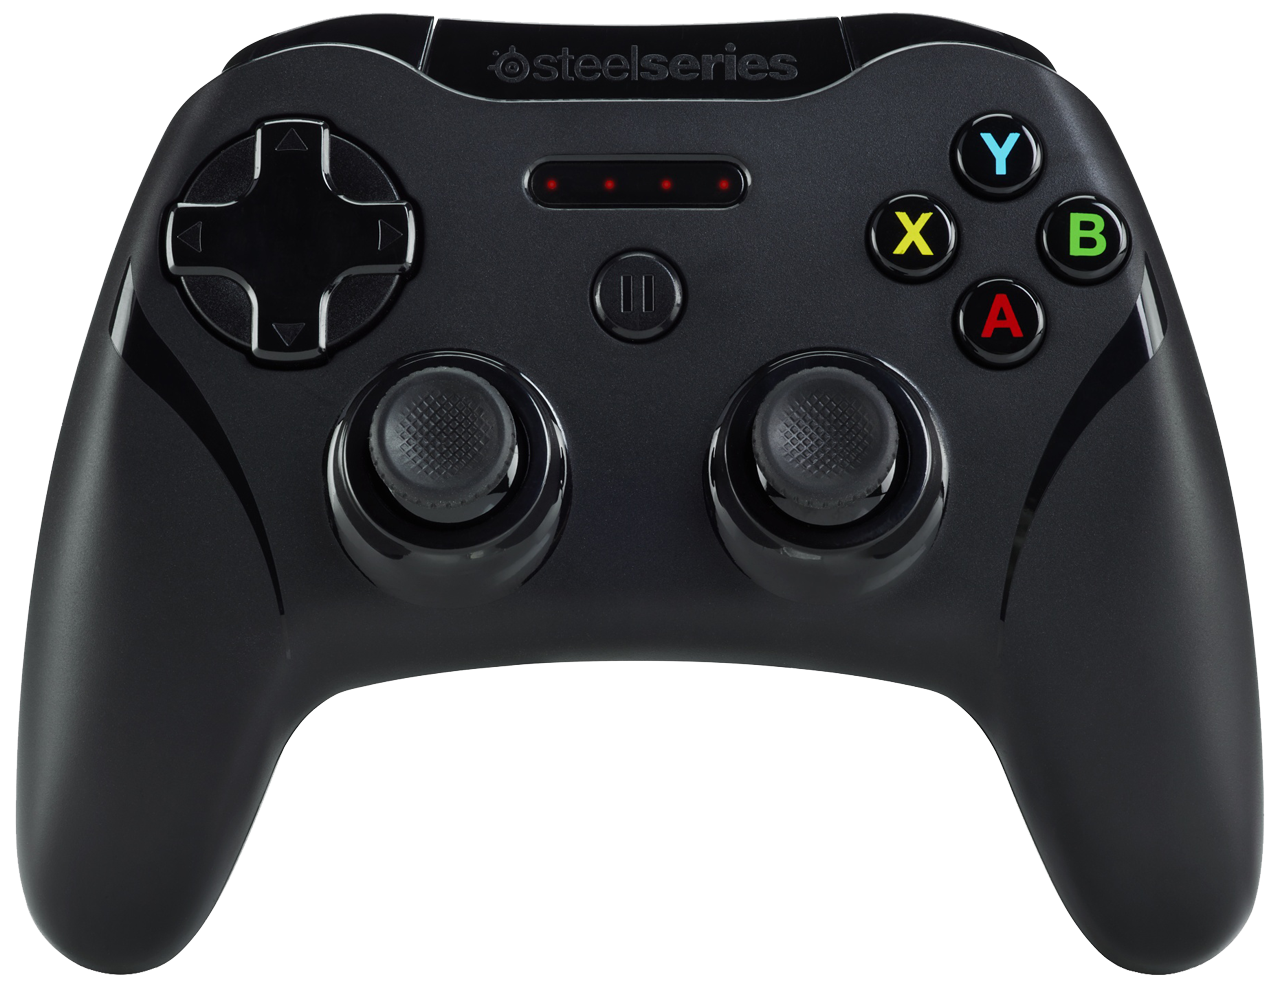 SteelSeries Stratus XL mfi controller review